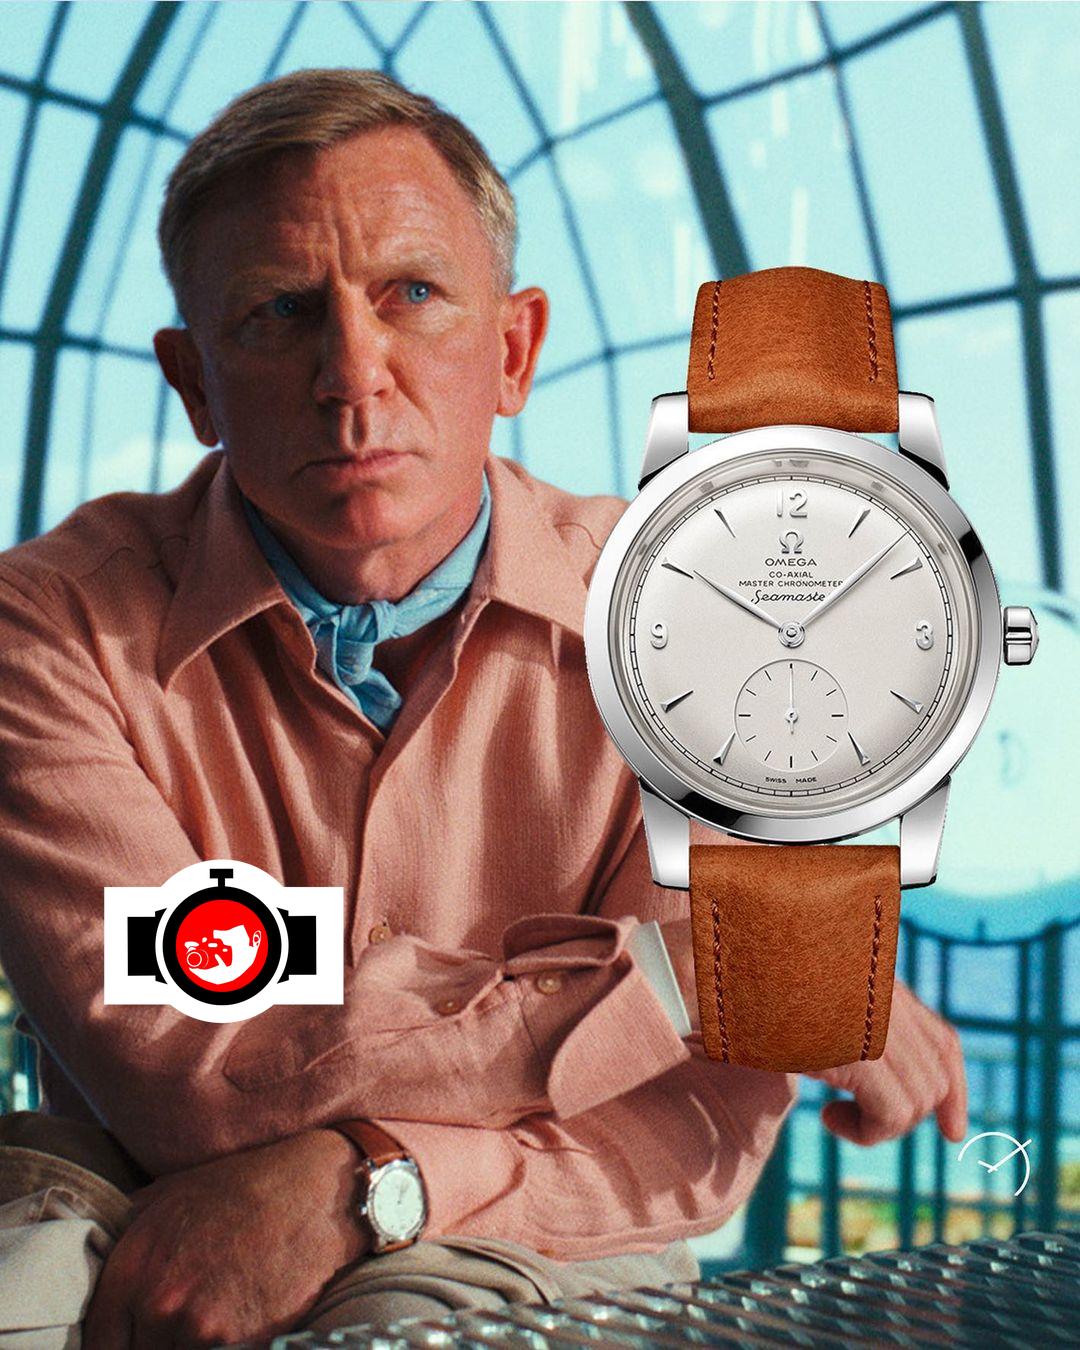 actor Daniel Craig spotted wearing a Omega 511.12.38.20.02.001